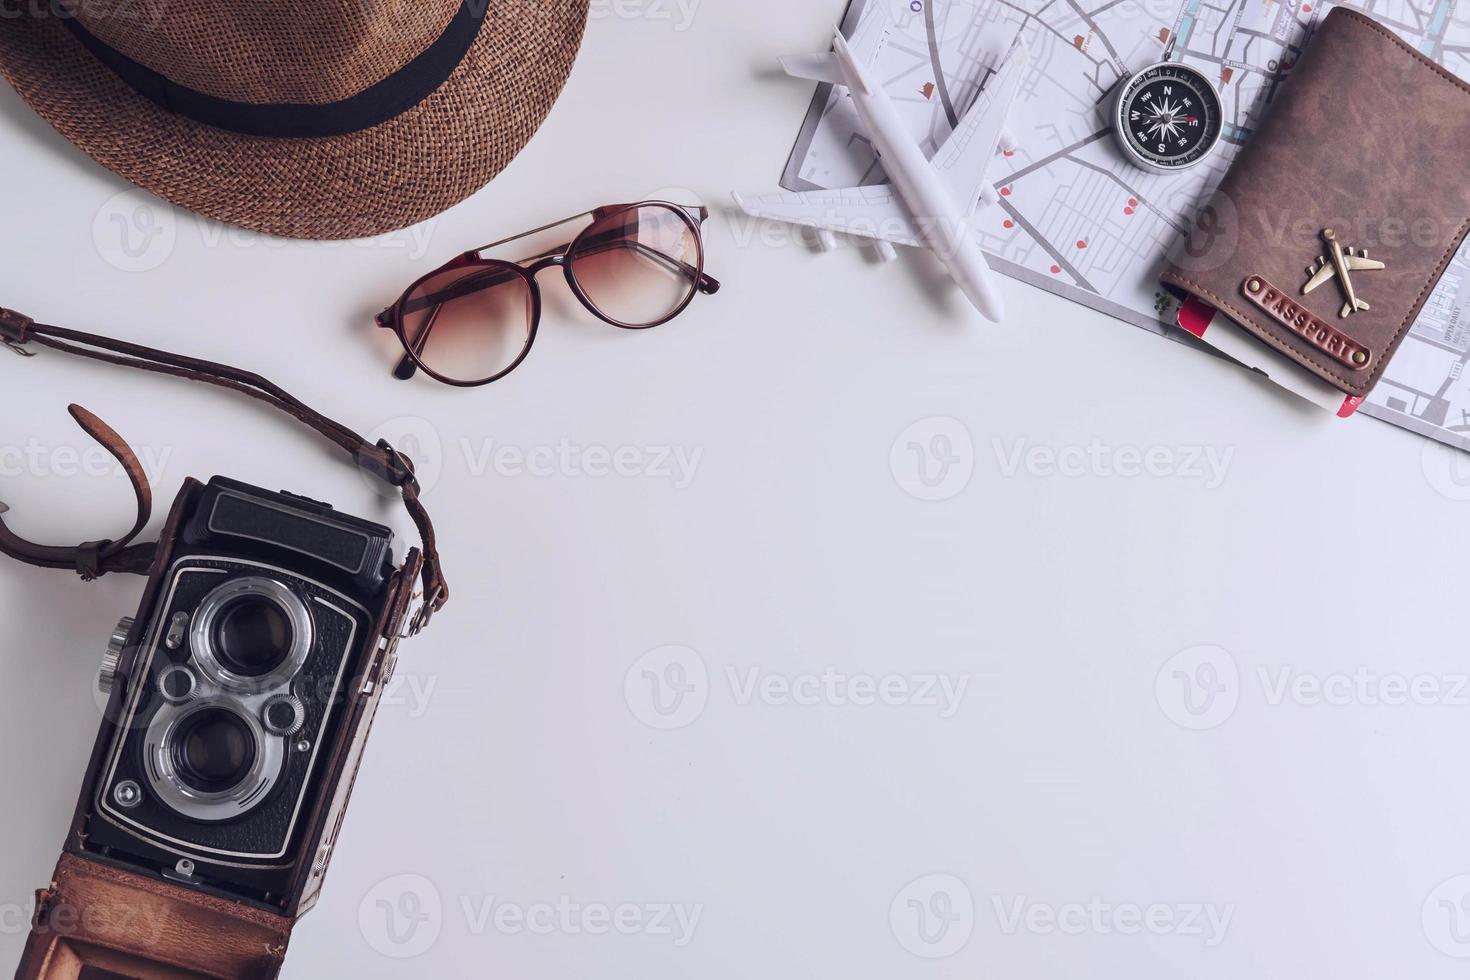 Retro camera with travel accessories and items on white background with copy space, Travel concept photo